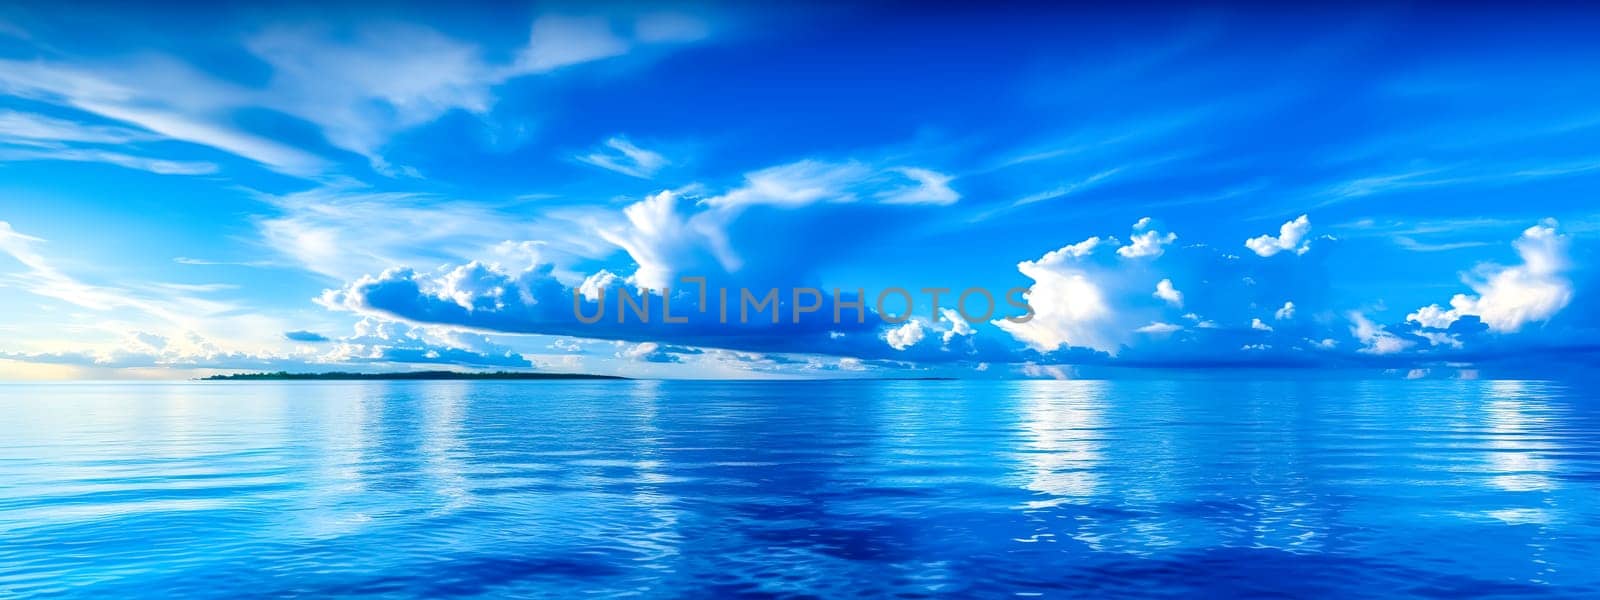 blue water surface of the ocean, clouds in the sky, banner made with Generative AI. High quality illustration